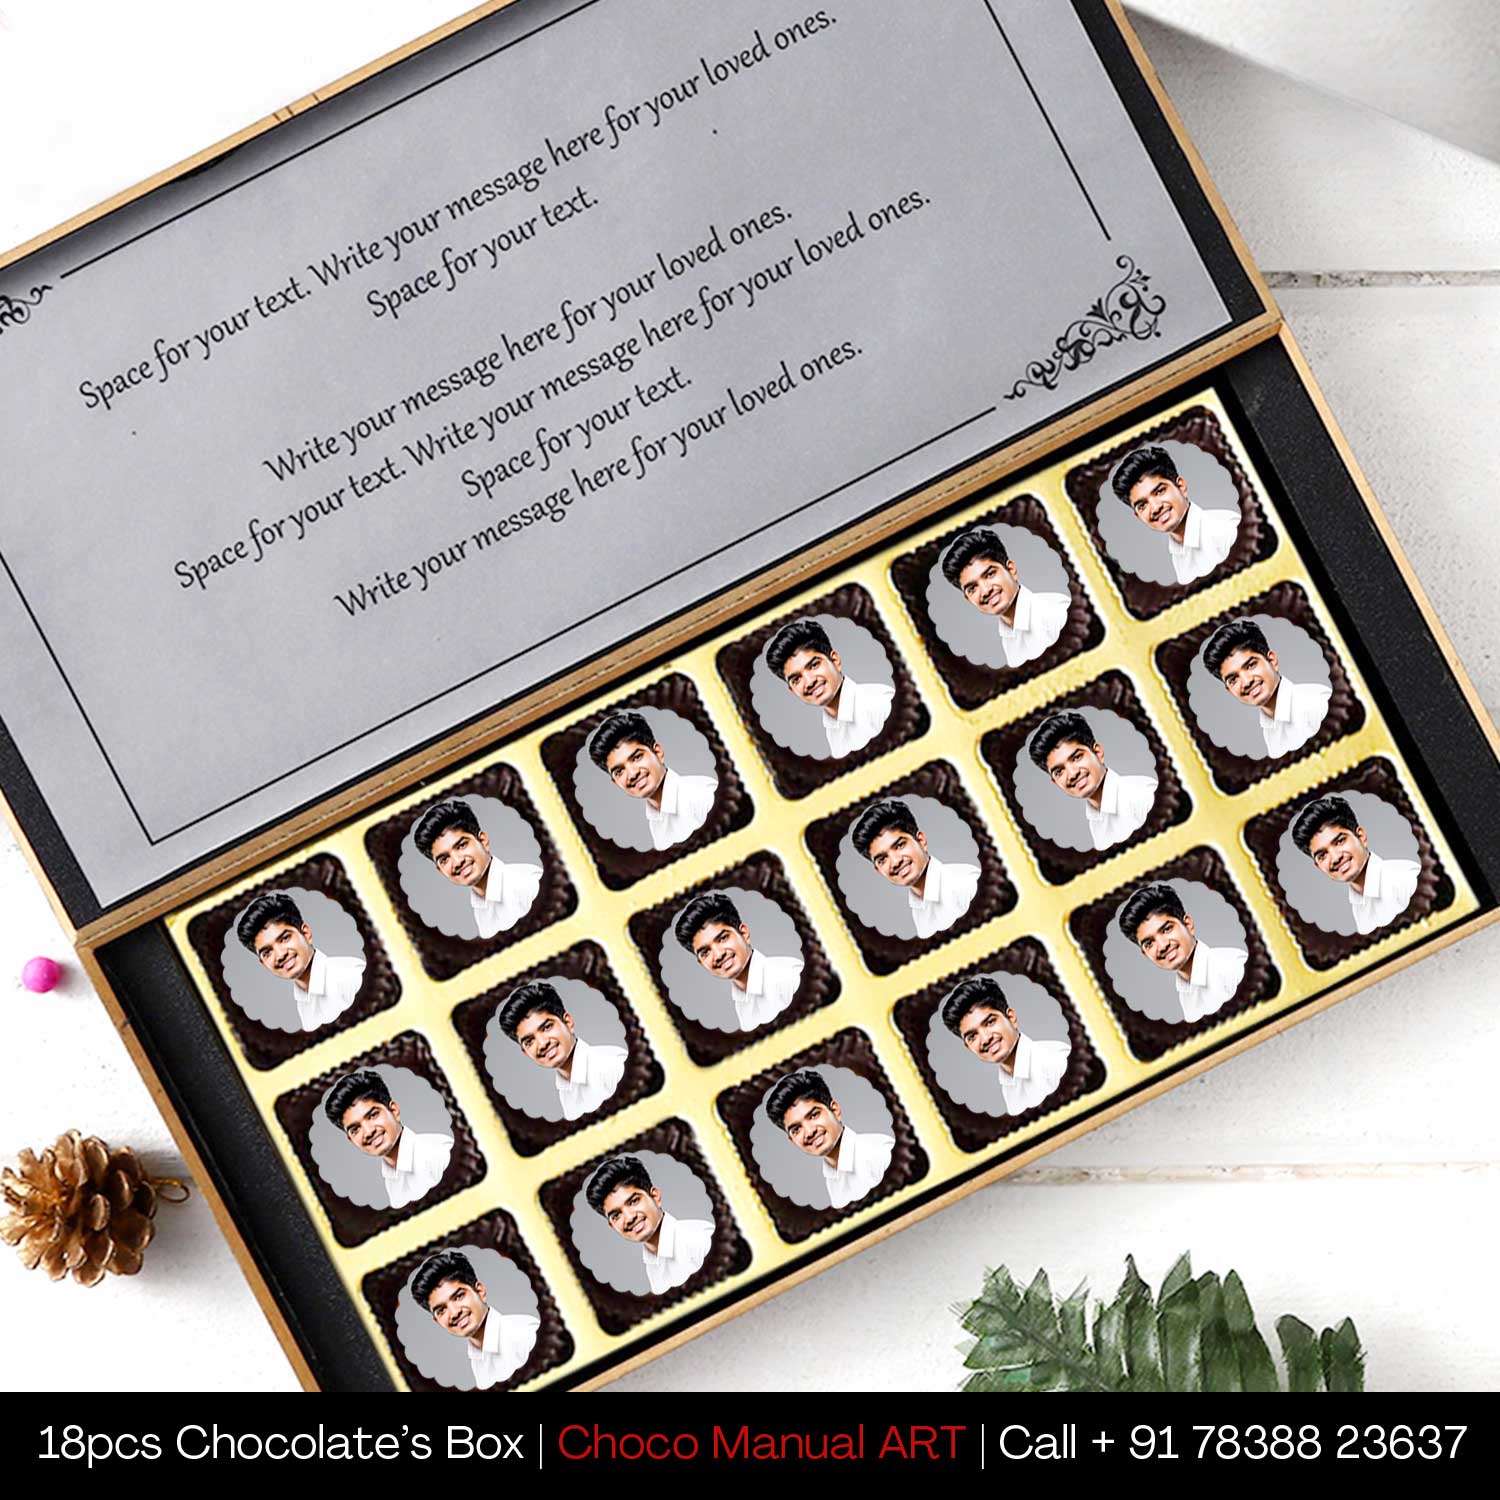 personalised chocolates with names personalised chocolates with photo personalised chocolate gift box personalised chocolates  customised chocolate wrapper personalised chocolate hamper personalised chocolates with photo india